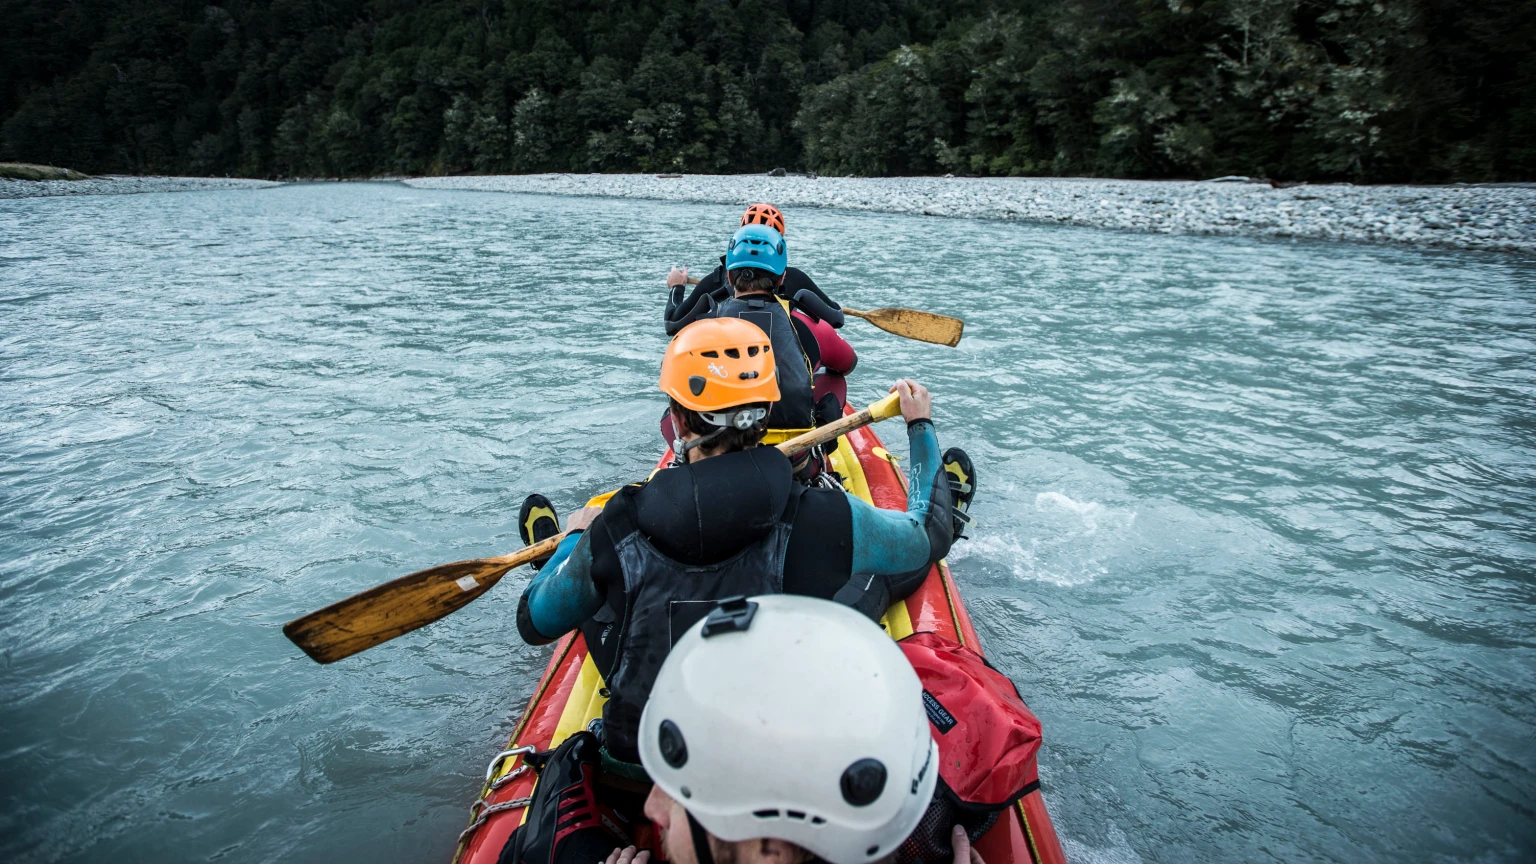 Navigating the small rapids and shallows of the Dart River